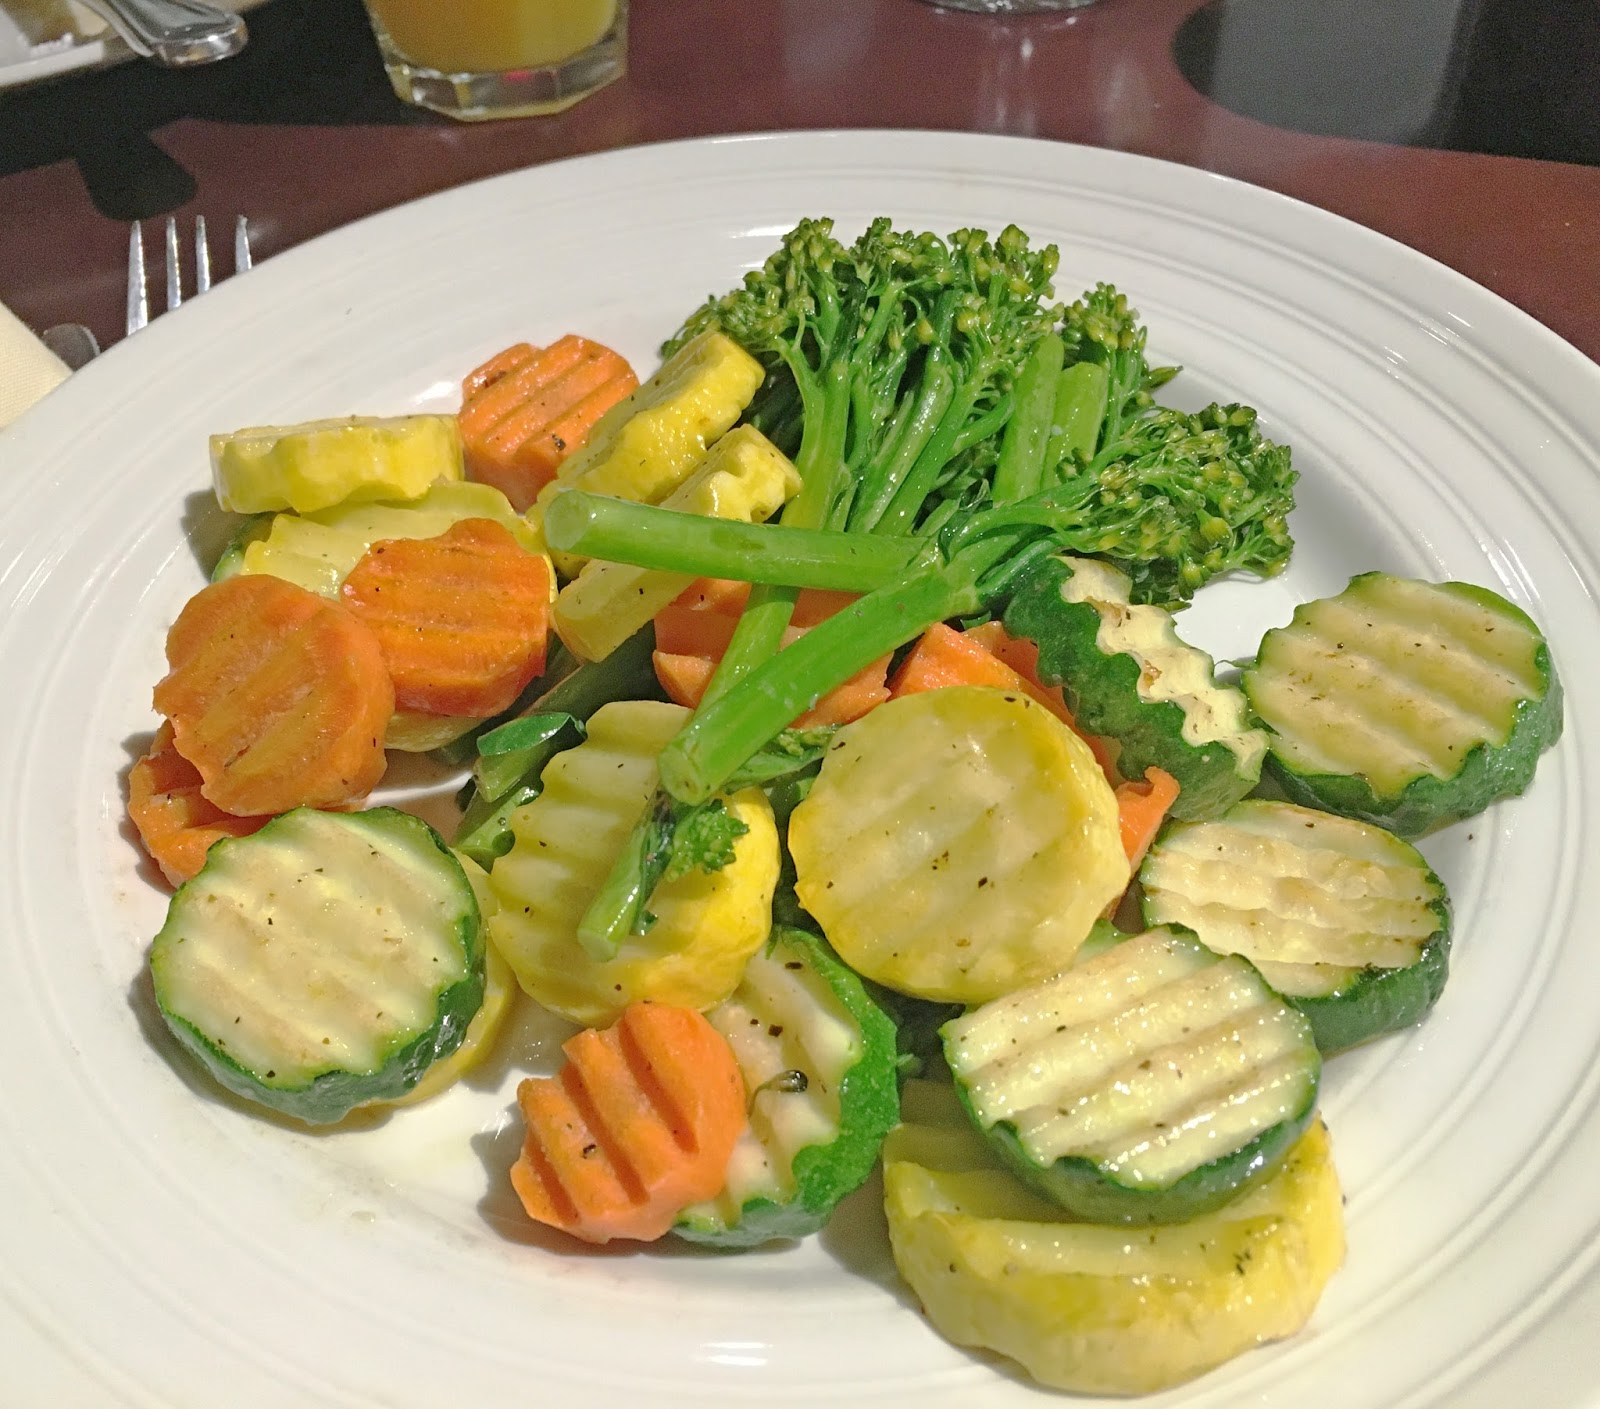 vegetables for breakfast at the hotel in Fort Worth, Texas